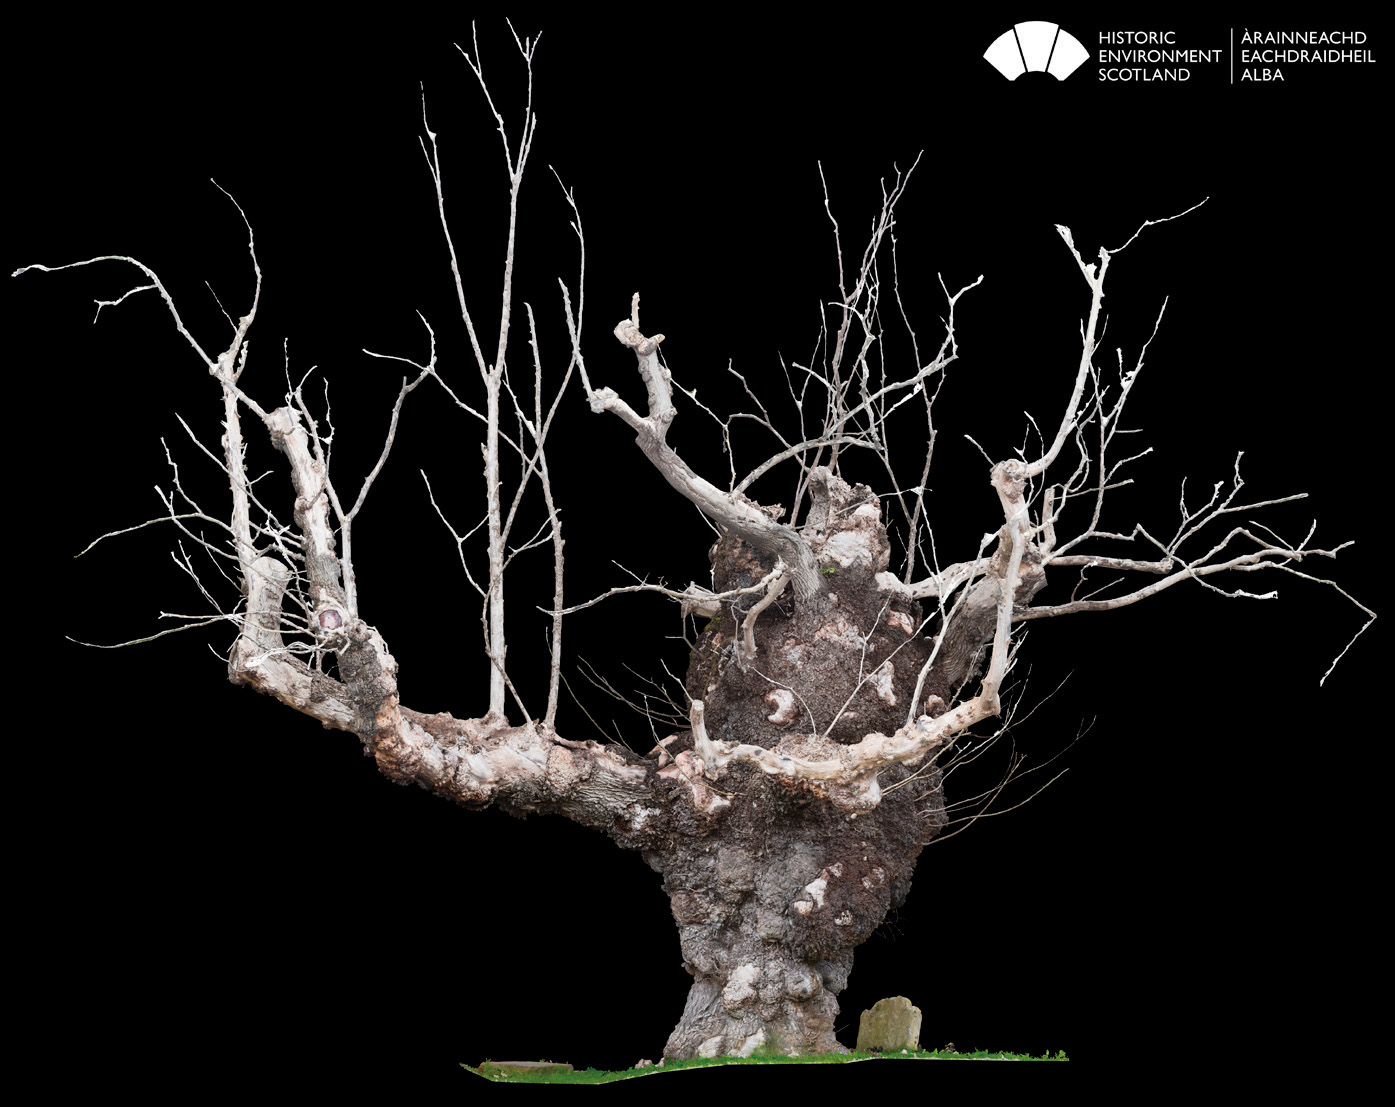 The Digital Documentation and Innovation Team at HES recorded the Beauly Elm using laser scanning and photogrammetry. (Historic Environment Scotland)